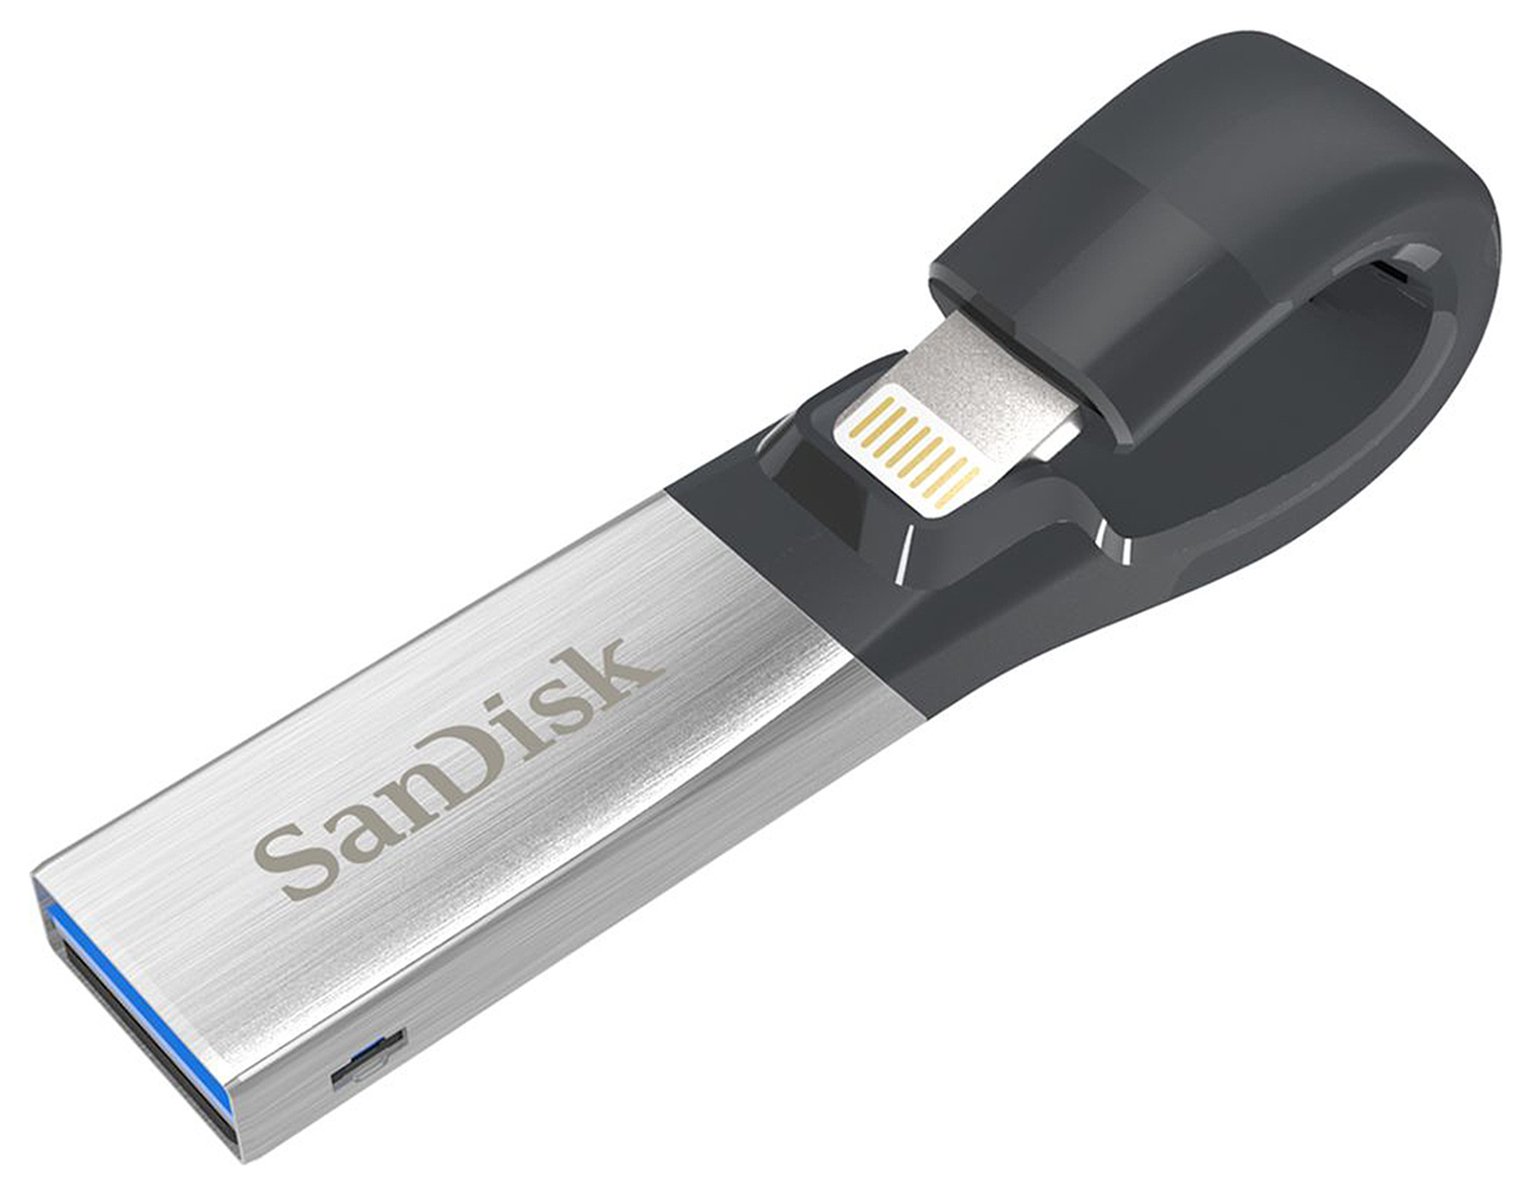 SanDisk iXpand 32GB Flash Drive for iPhone and iPad Review